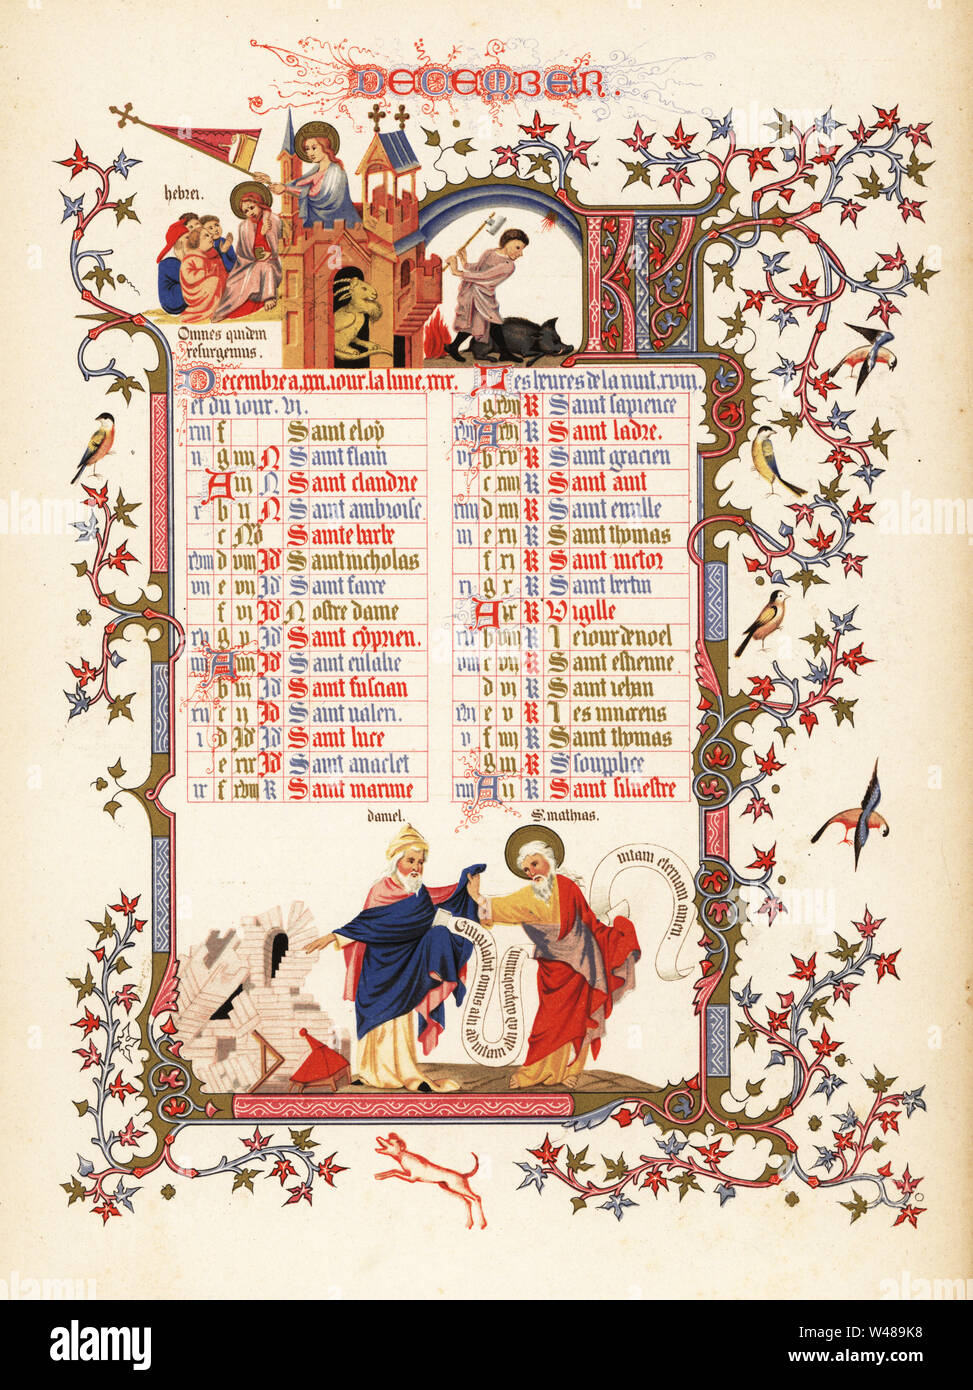 Calendar for December with figures of Daniel and St. Matthew, quote from Epistle to the Hebrews, disciples, man slaying a boar with an axe, goat, dog, birds, foliage and castles. From an illuminated Book of Hours of the Duke the Anjou., 1380. Chromolithograph in colors and gilt from Henry Noel Humphreys’ The Illuminated Calendar and Home Diary for 1846, Longmon, London, 1846. Stock Photo